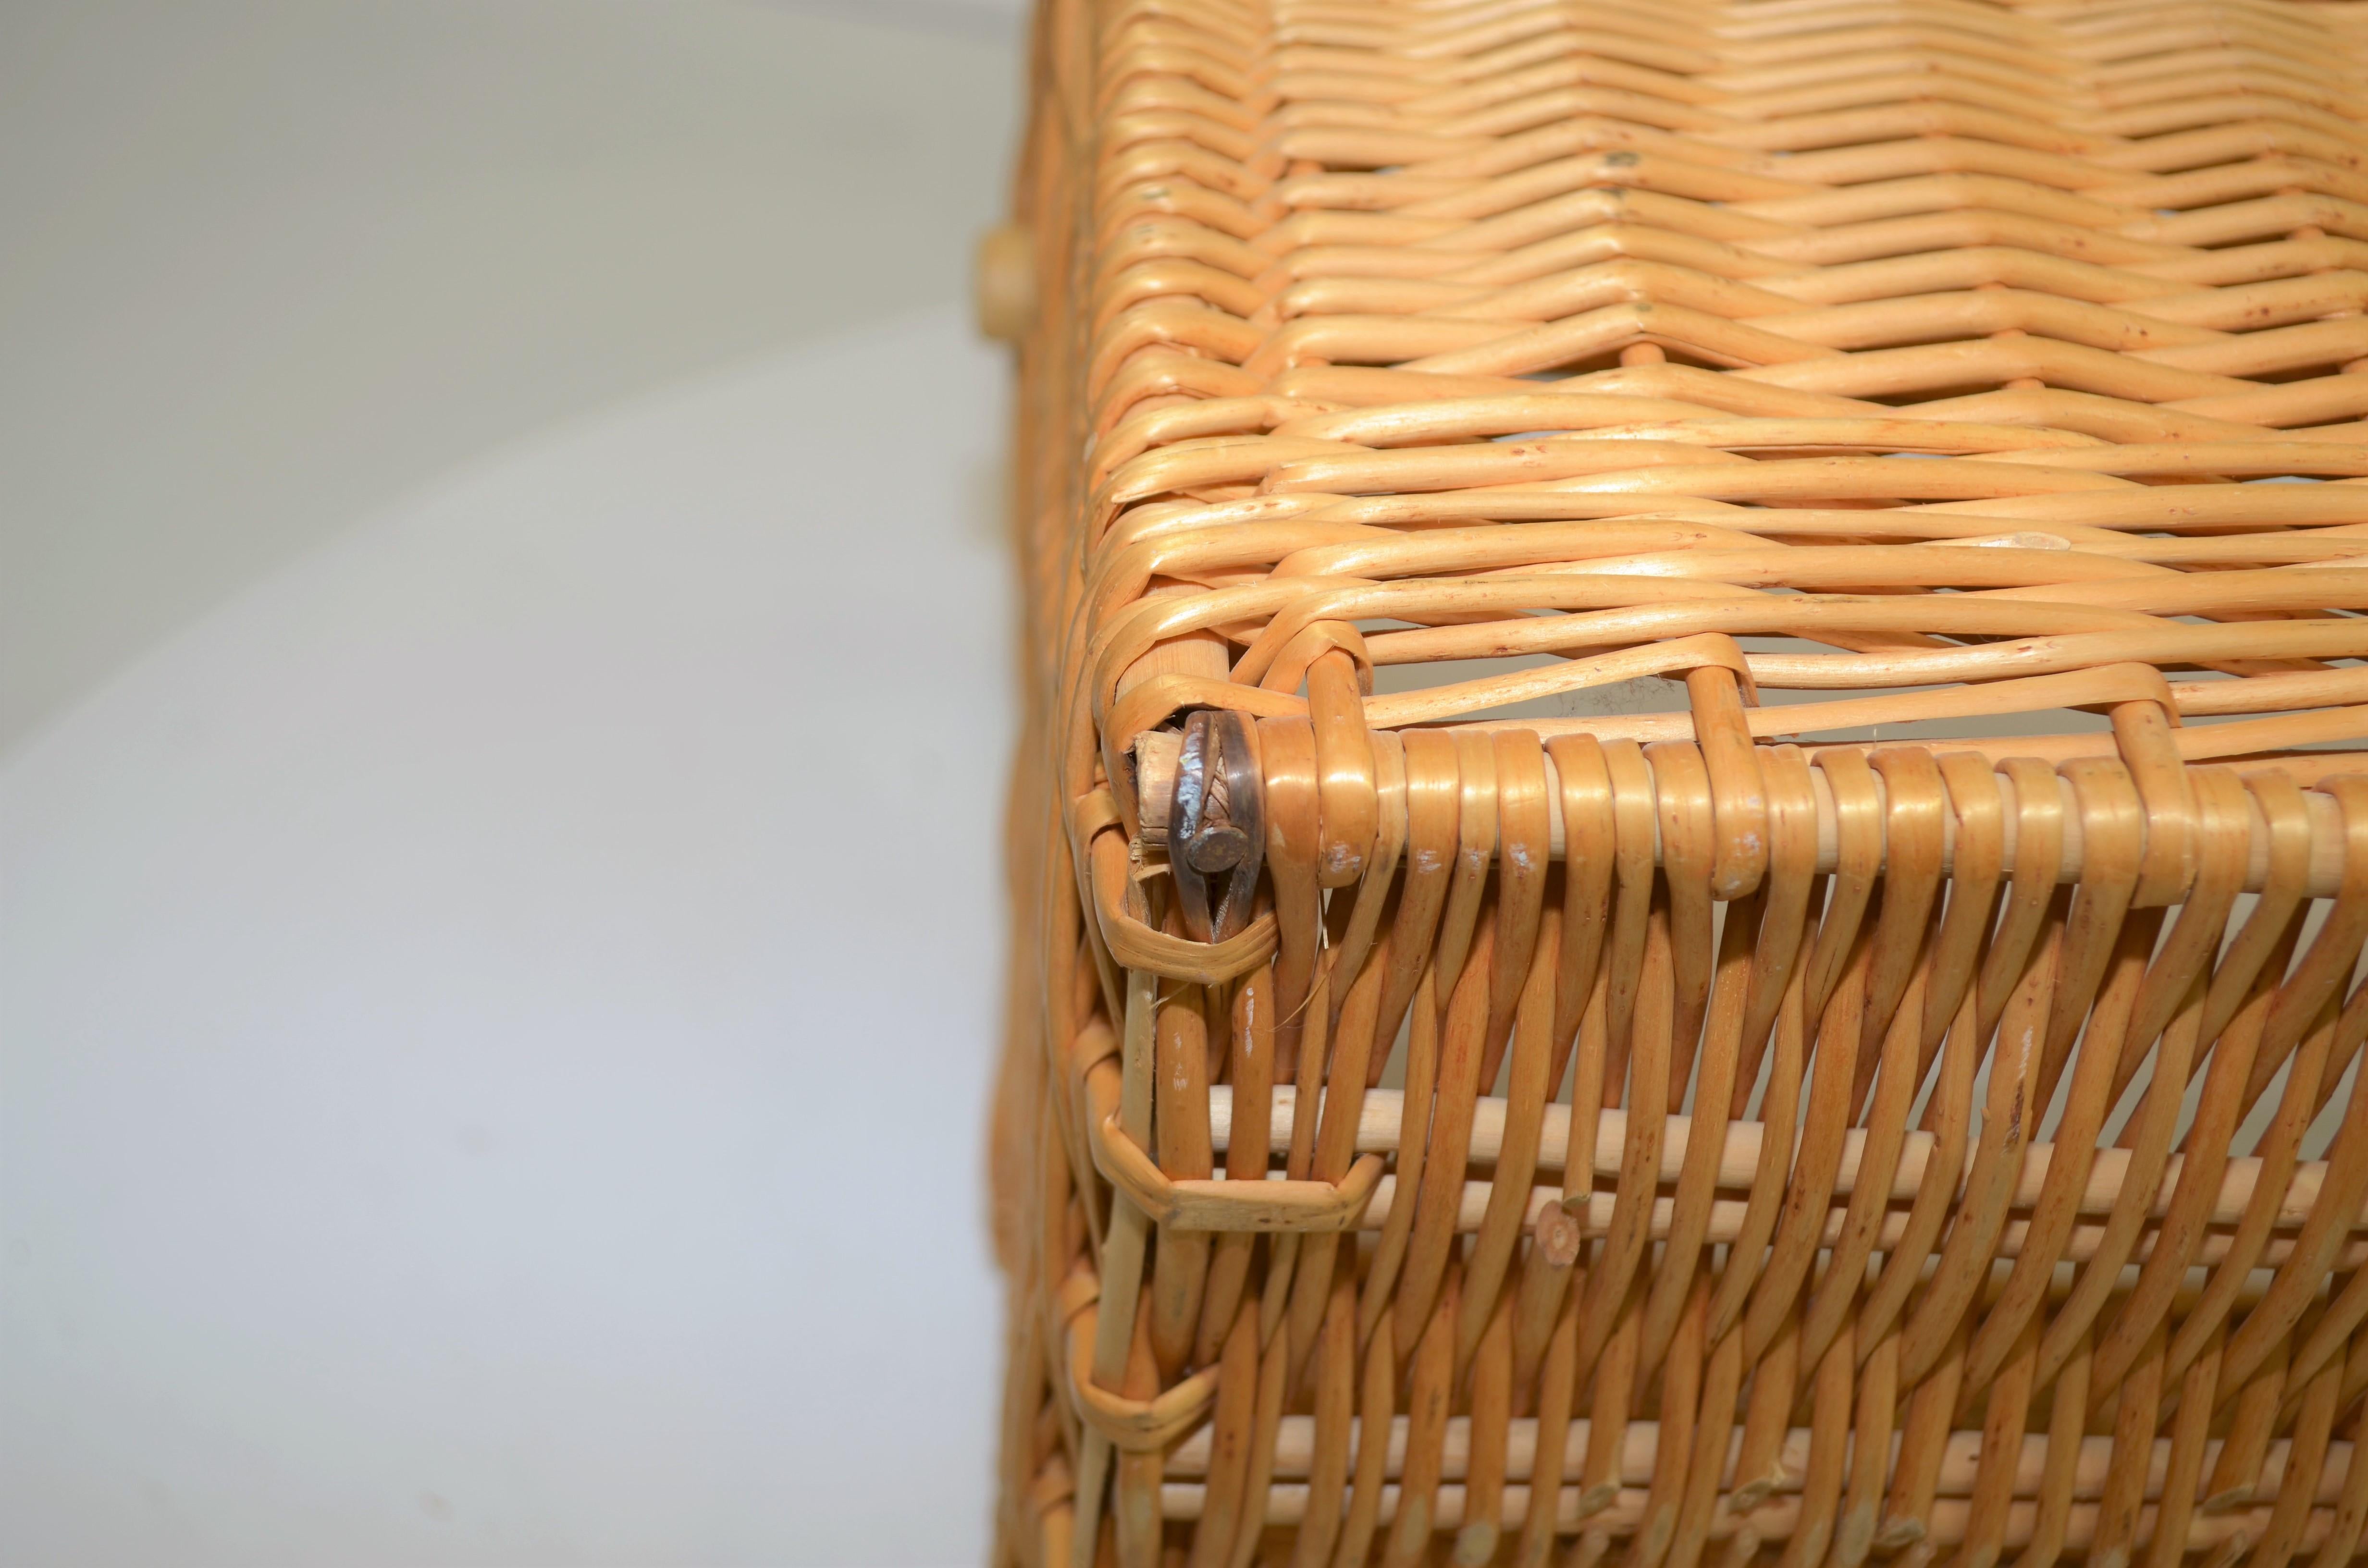 RARE 1980's Hermes Picnic / Grooming Box Wicker Basket In Excellent Condition For Sale In Carmel, CA